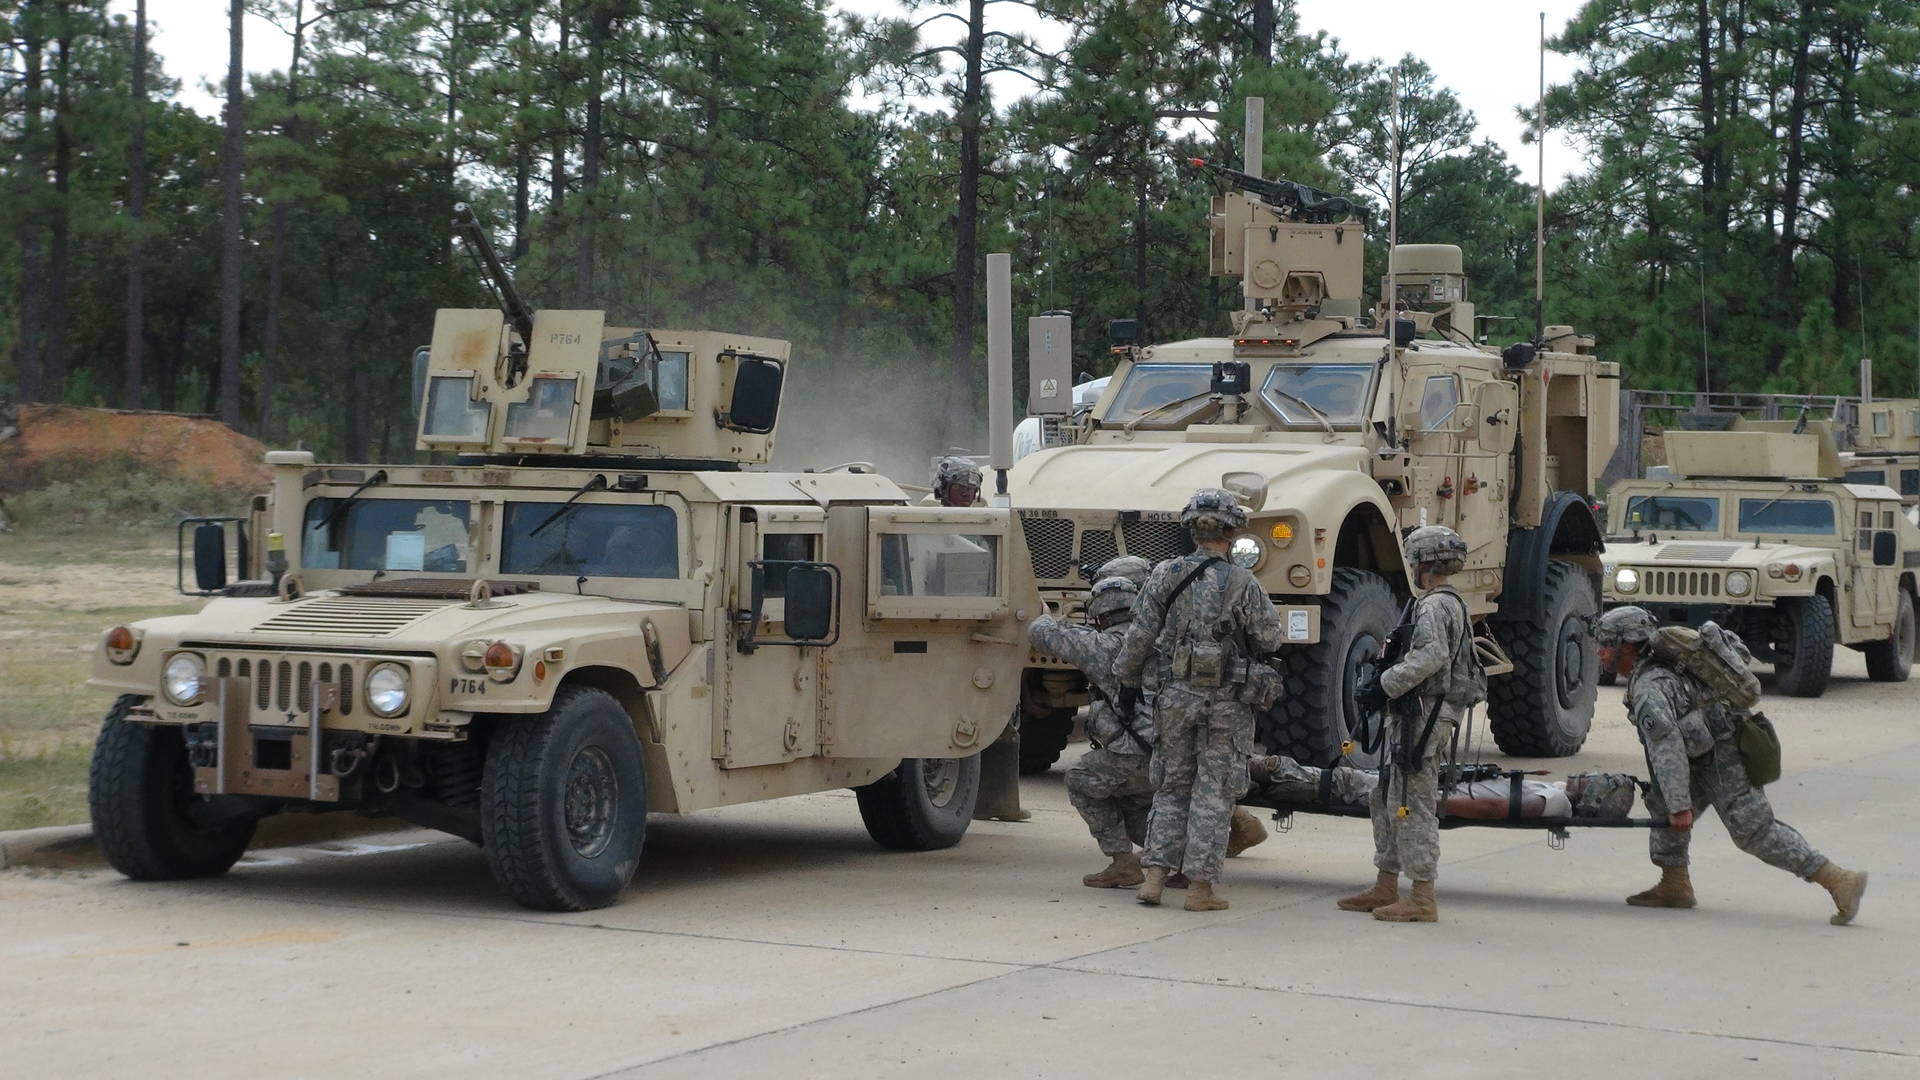 The Soldier's Network - Combat team/ 101st Airborne Division conducting operational missions using WIN-T Inc. 2